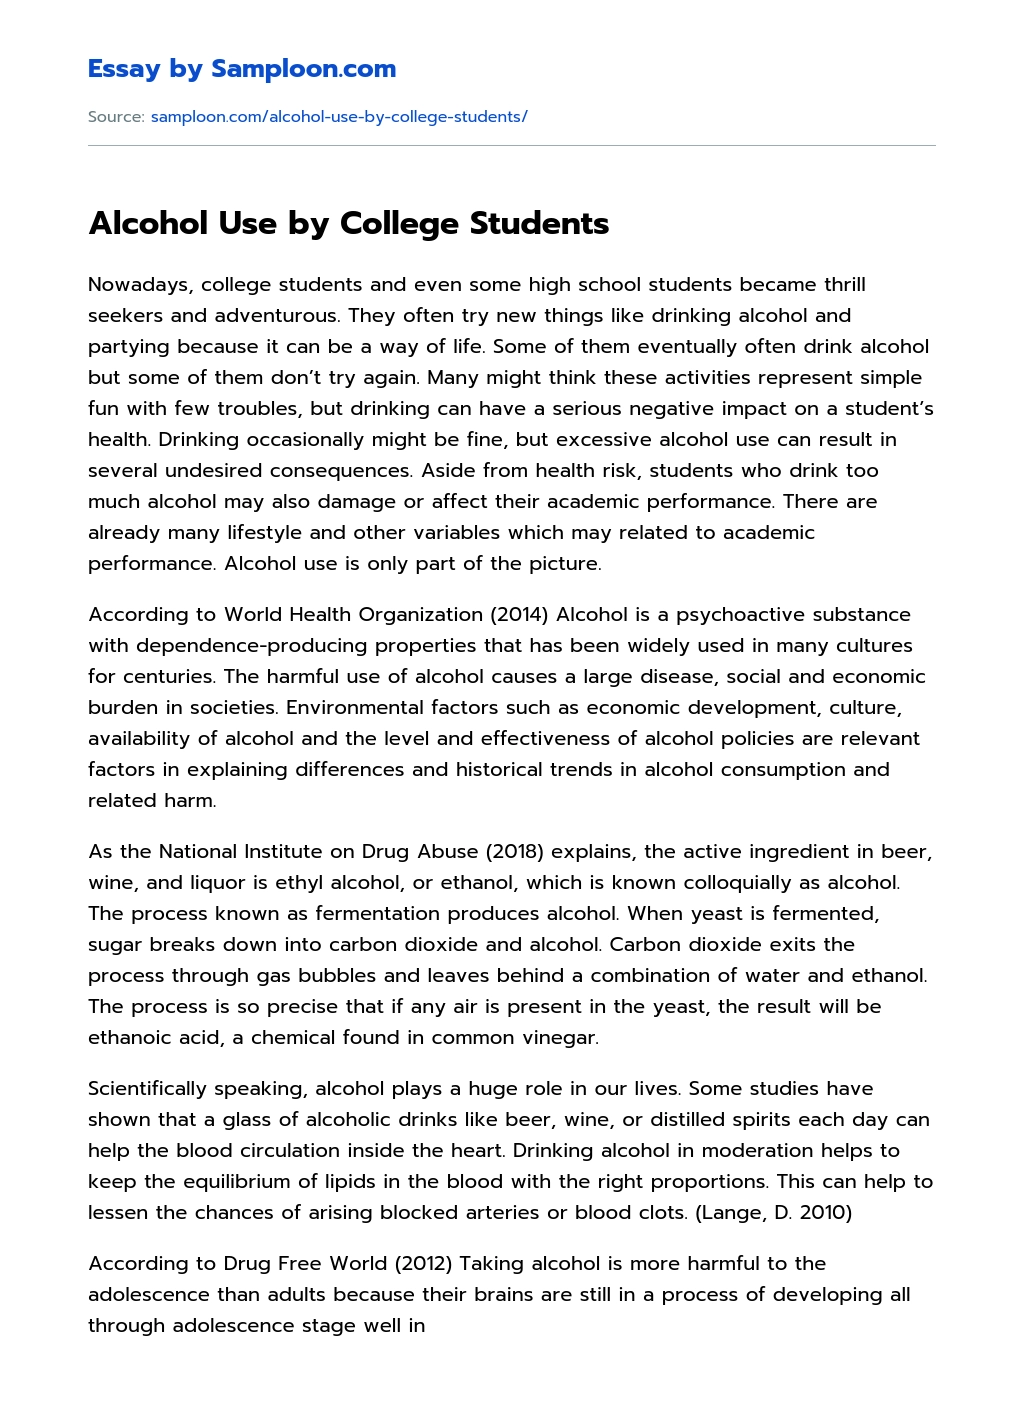 Alcohol Use by College Students essay